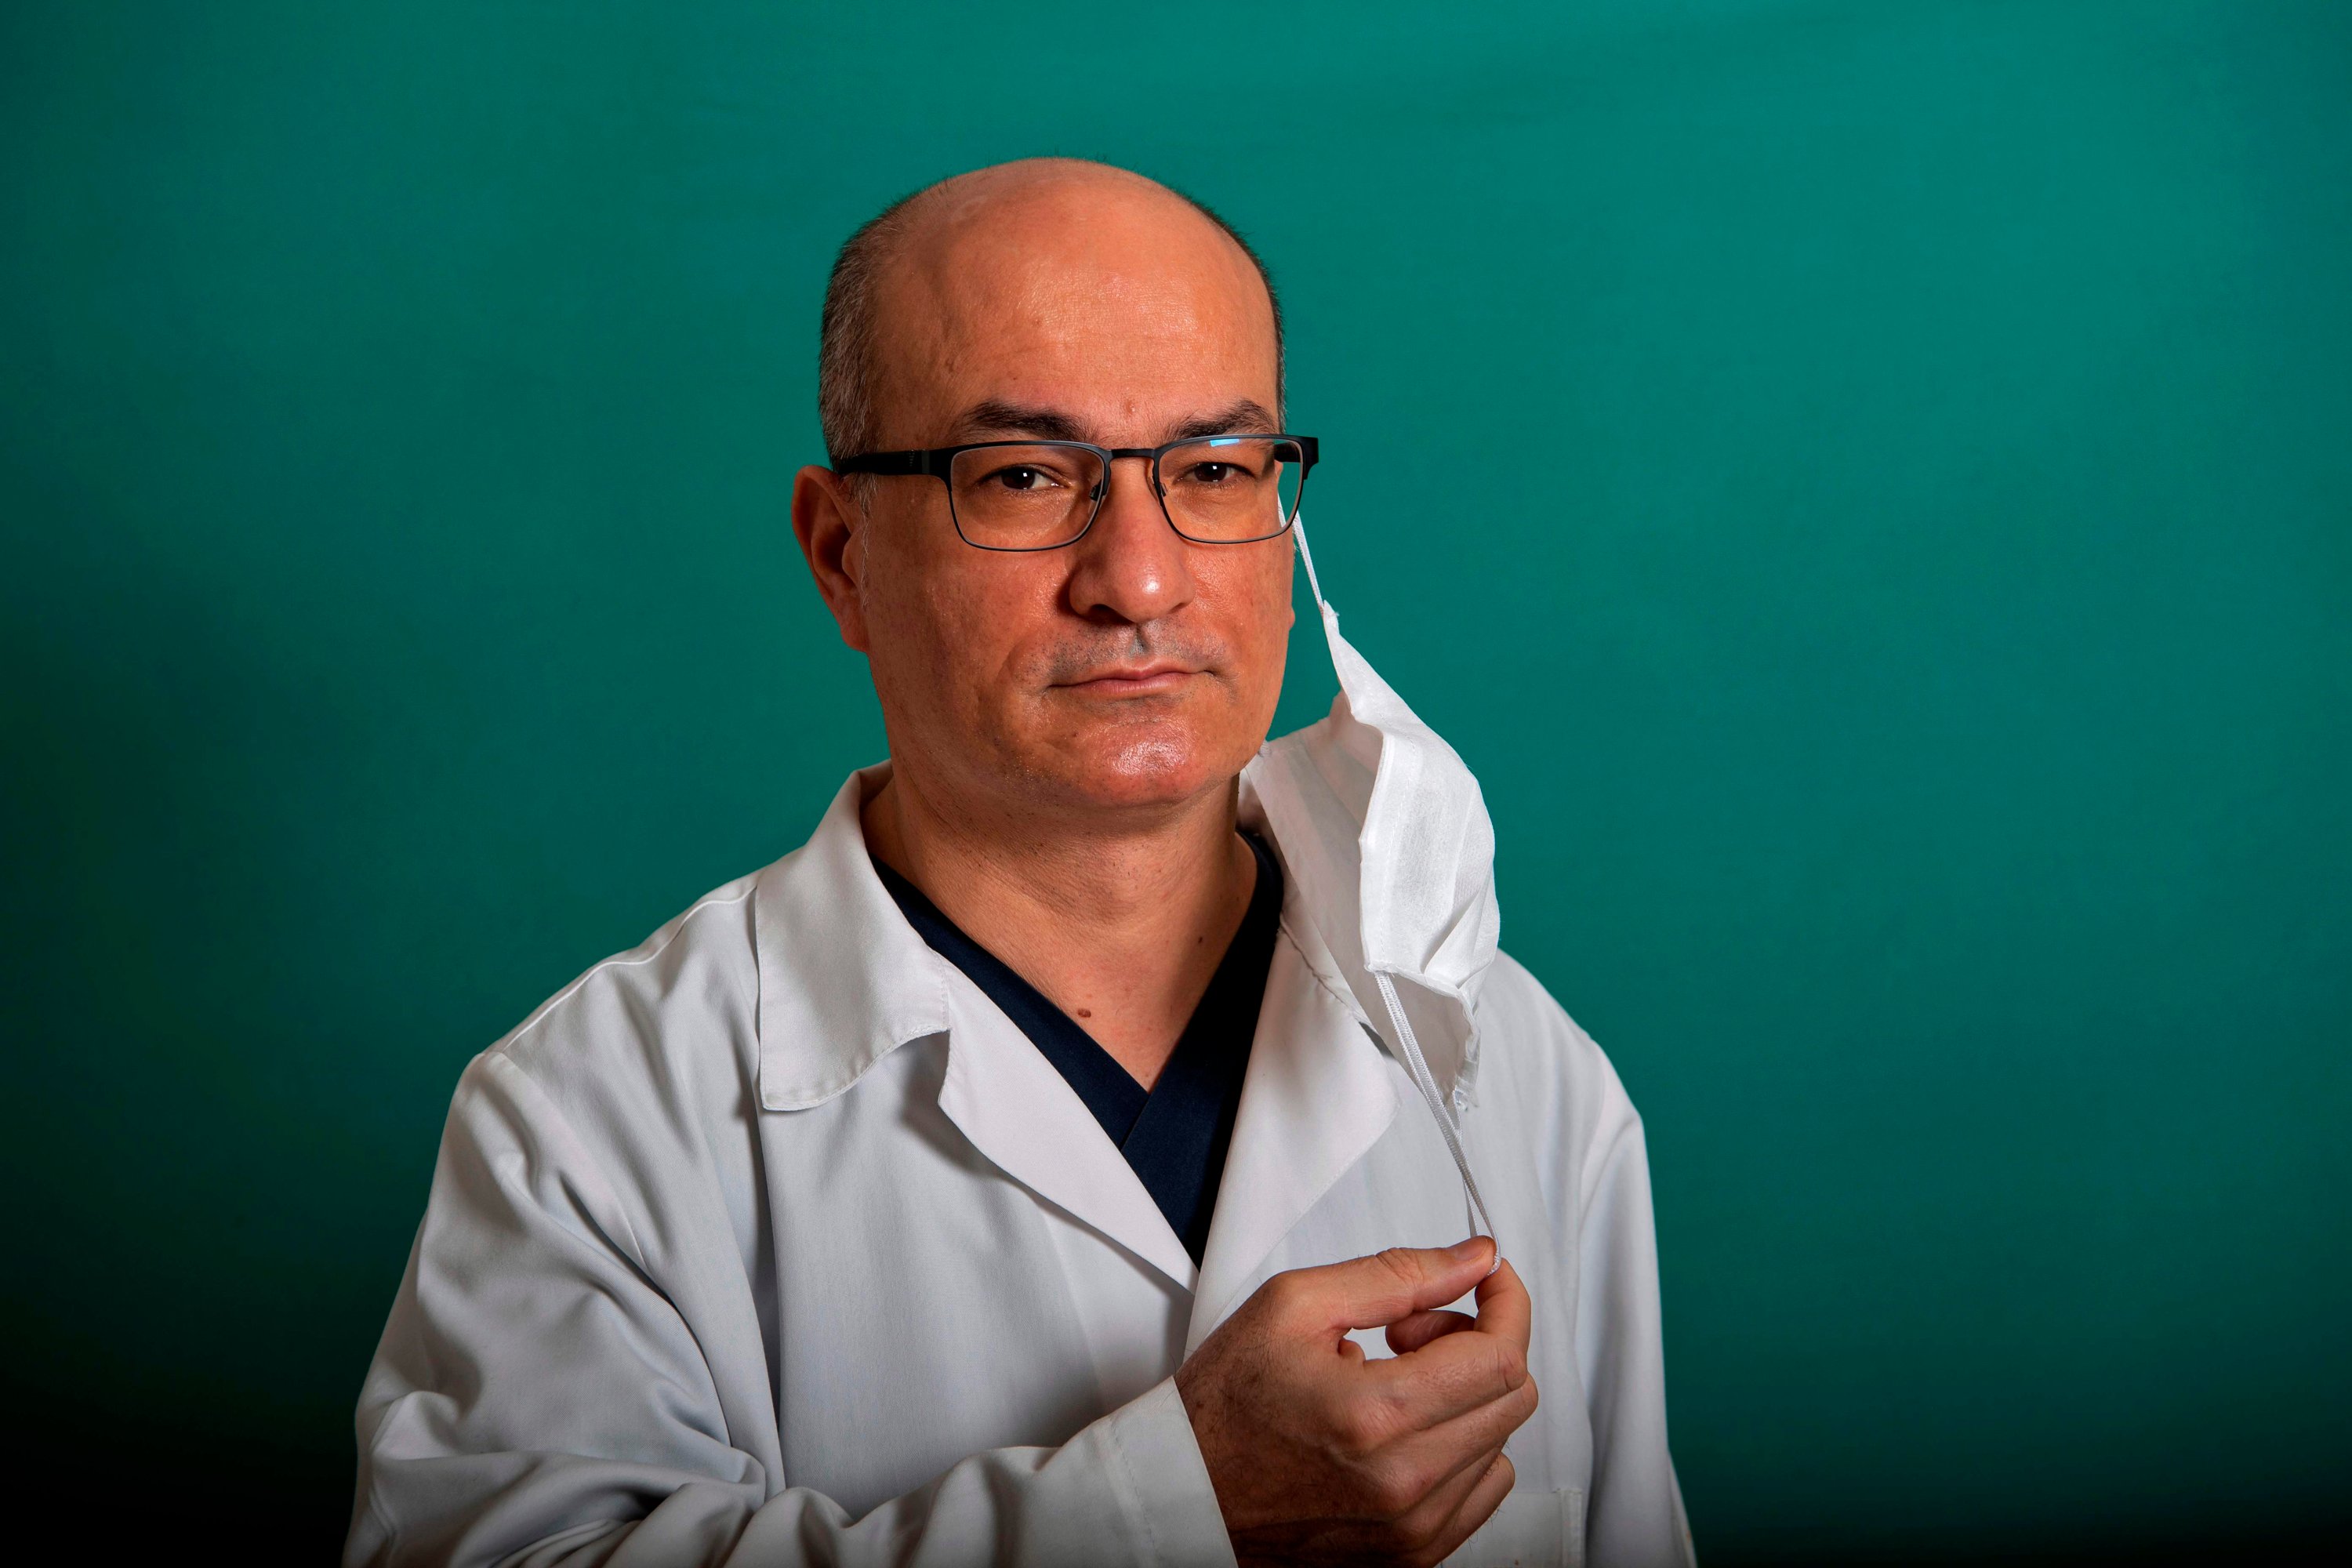 Associate professor and chief of the Cerrahpaşa Hospital Zekayi Kutlubay, 49, who has been working for twenty year as a registered doctor and treats COVID-19 patients, poses during a photo session.